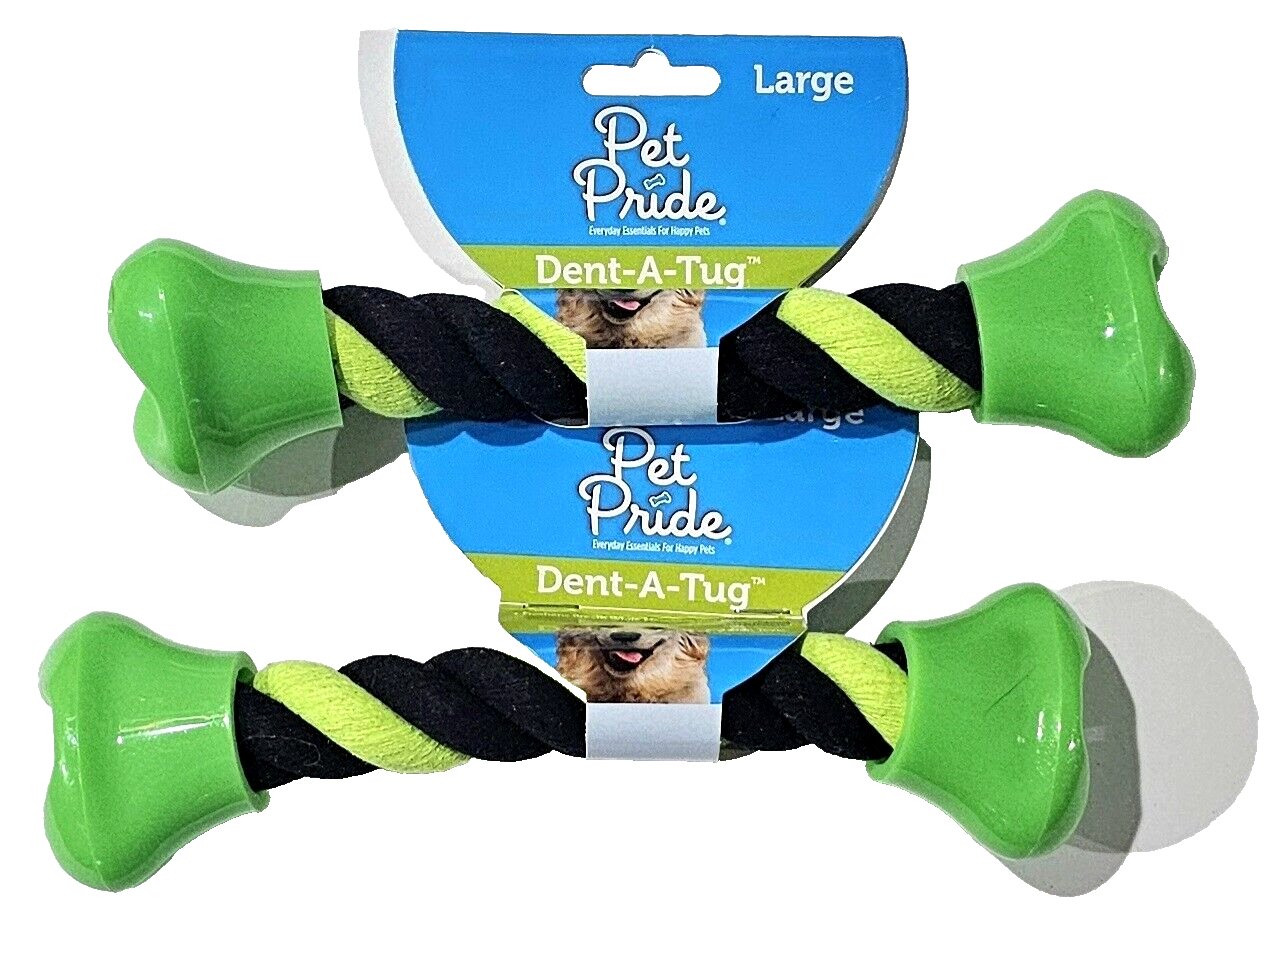 Primary image for Pet Pride Everyday Essentials For Happy Pets Dent-A-Tug Large Green Dog Toy